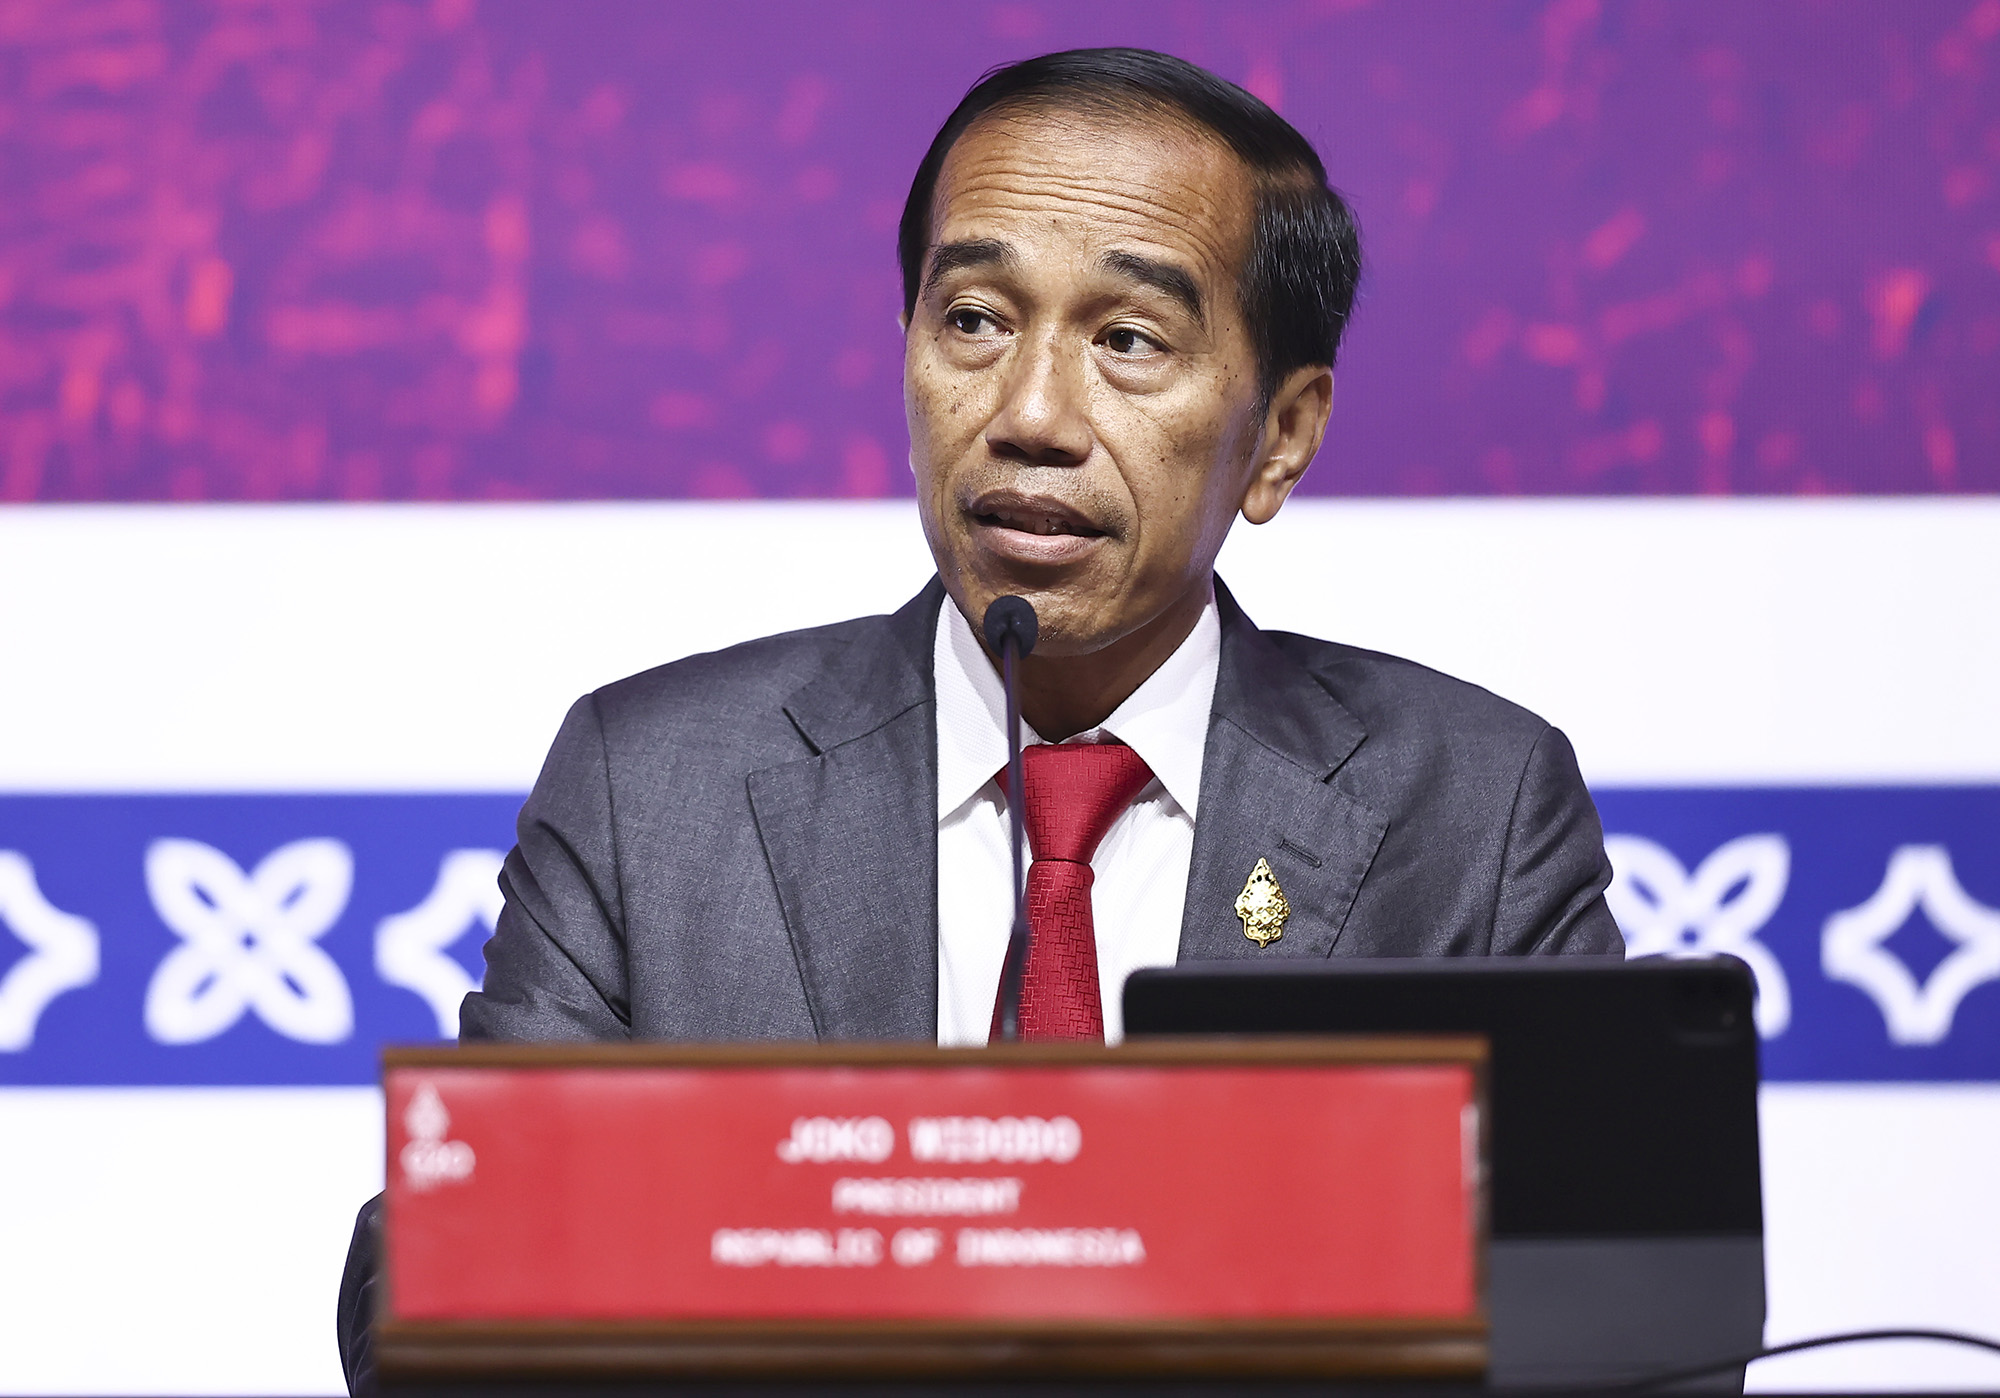 Indonesian President Joko Widodo makes a statement as he holds a press conference within the last day of the G20 Leaders' Summit in Bali, Indonesia on November 16.